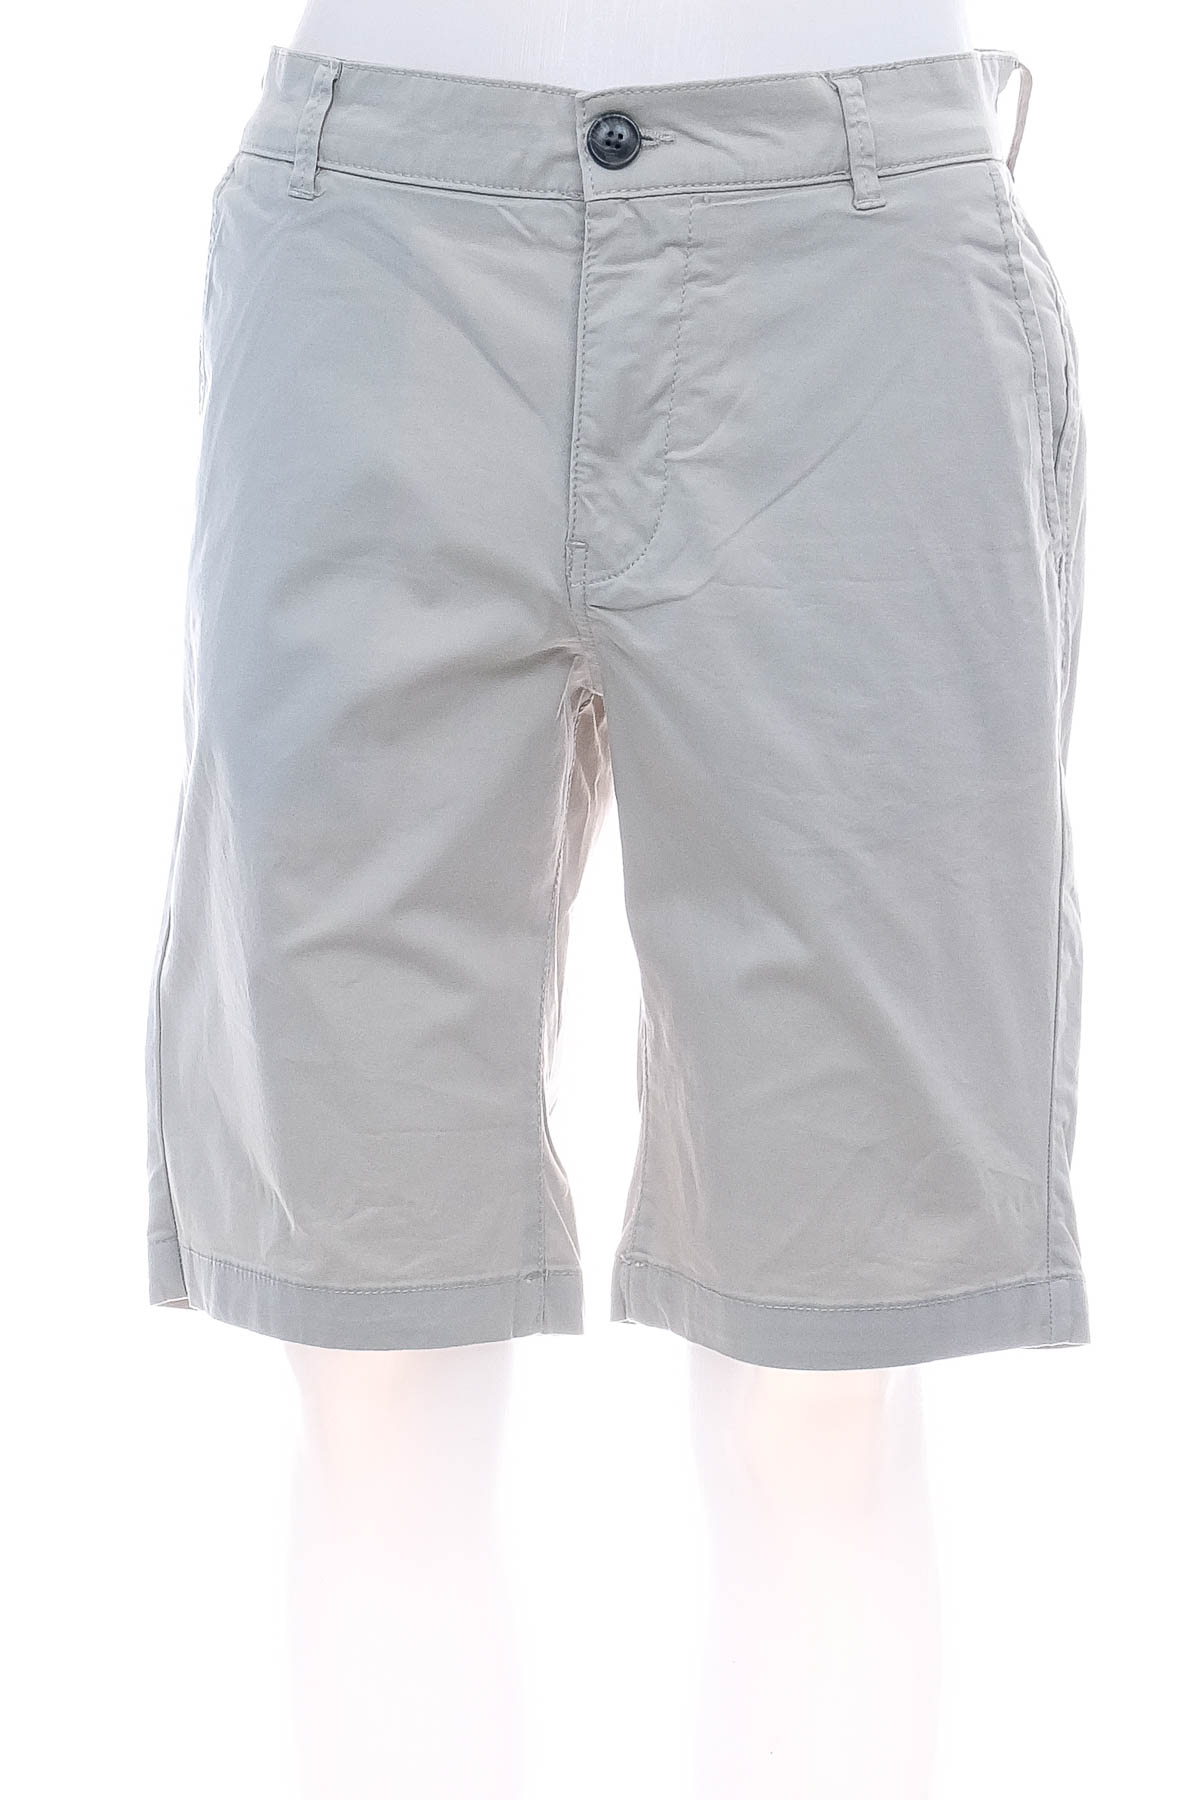 Men's shorts - SELECTED HOMME - 0